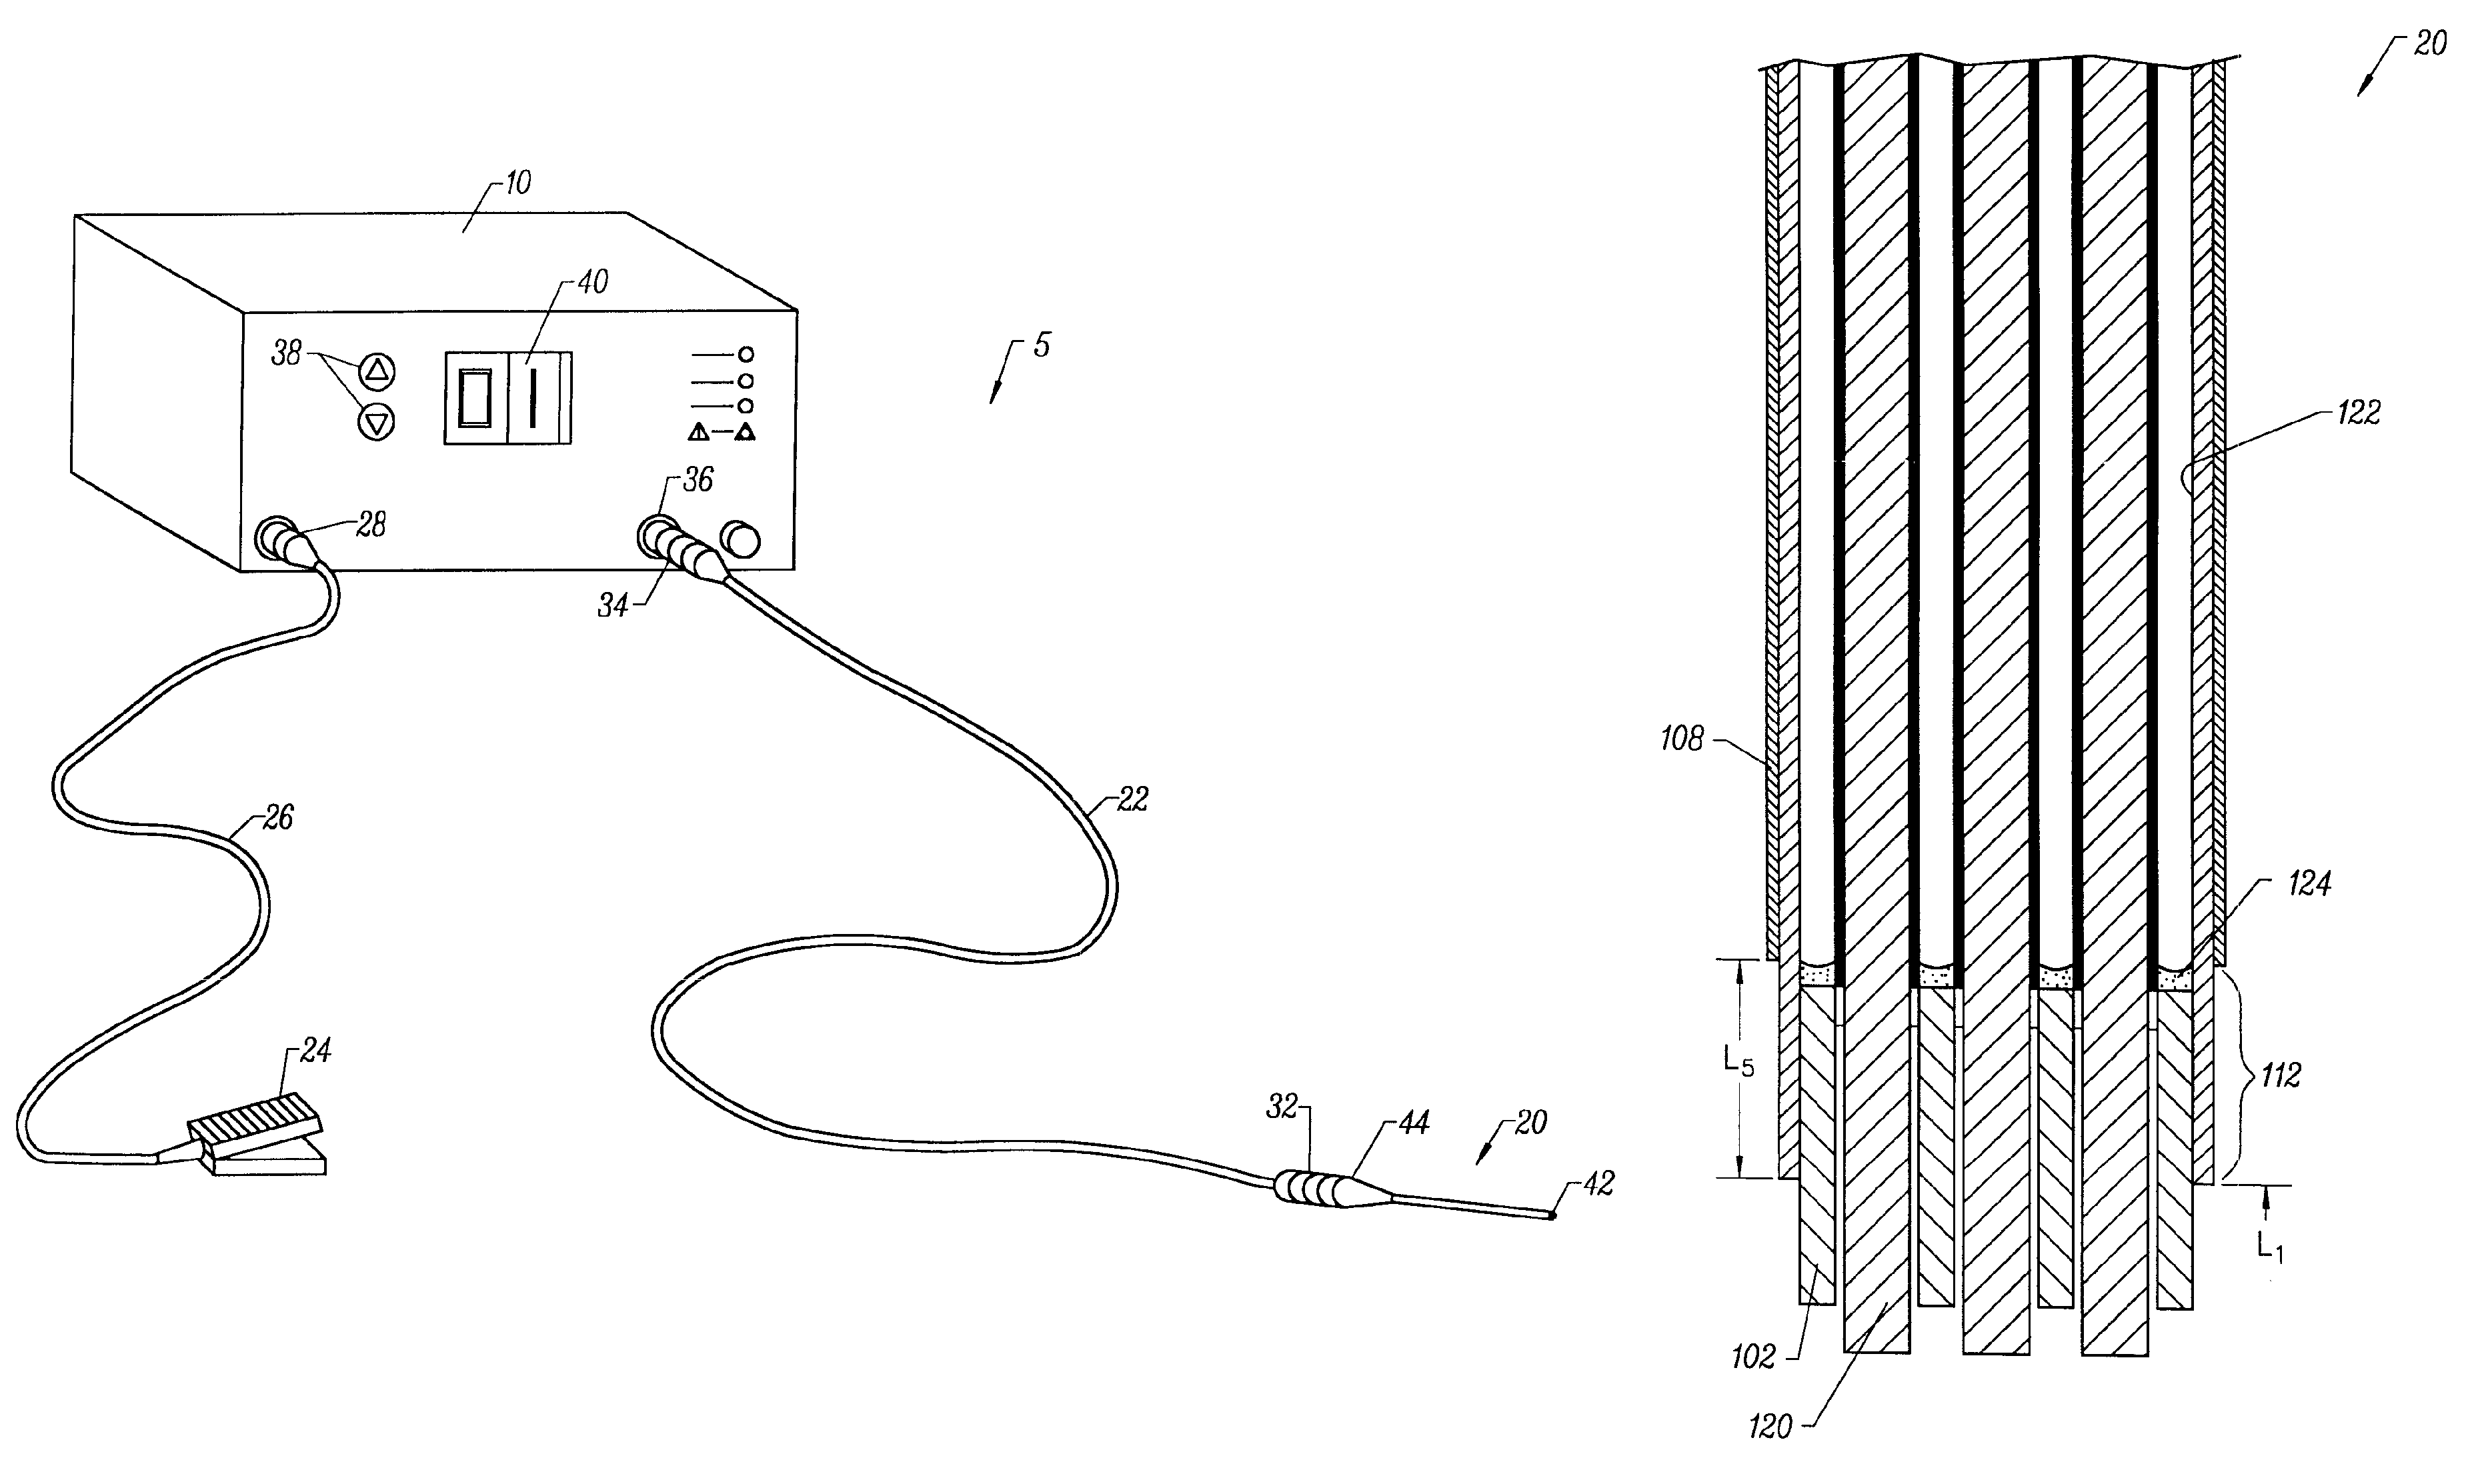 System for electrosurgical tissue treatment in the presence of electrically conductive fluid